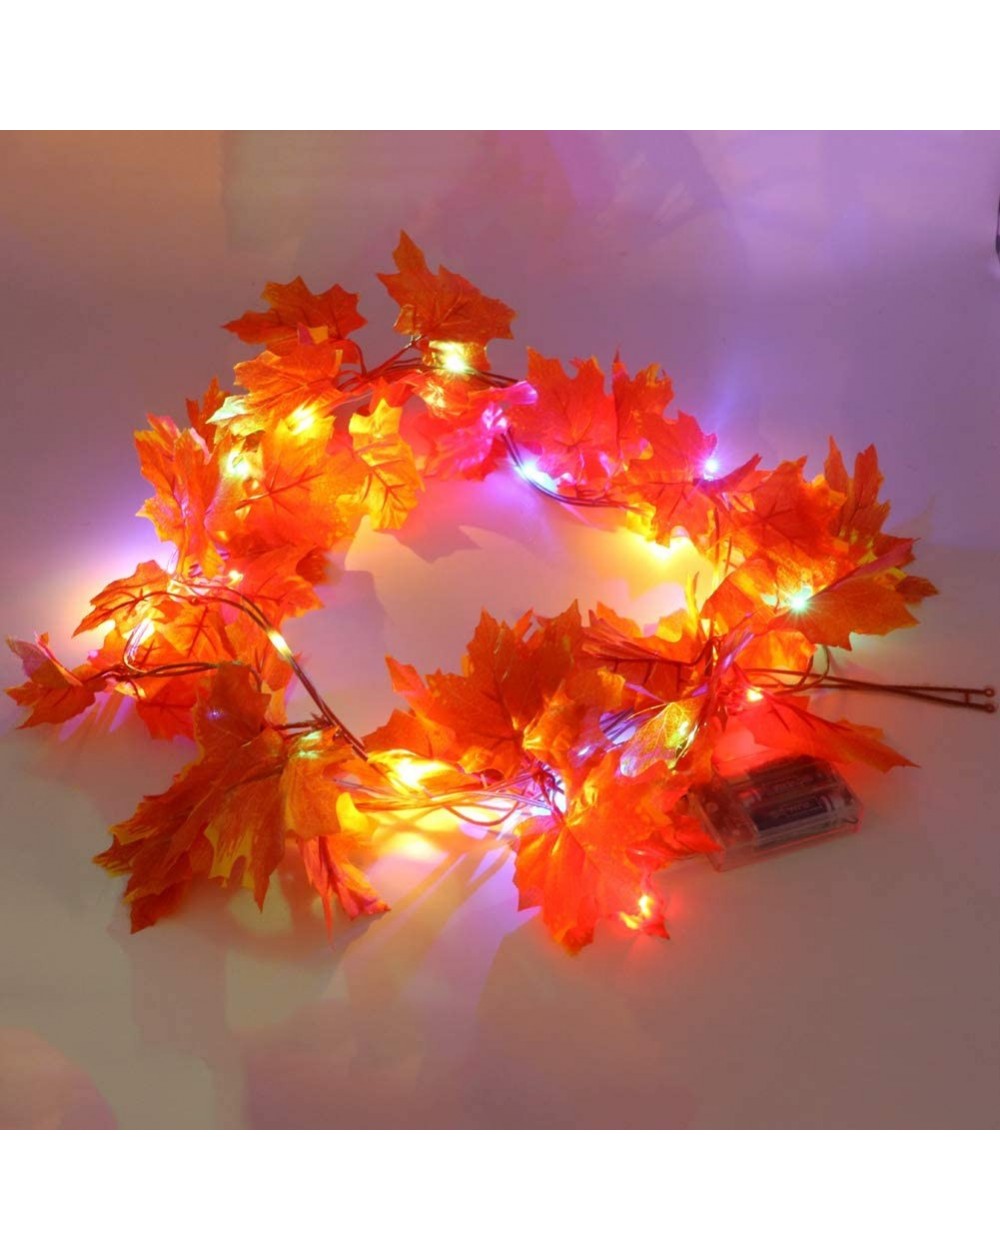 Garlands 2 Pack Thanksgiving Fall Decorations Leaf Lighted Garland String Lights for Indoor Outdoor 7.55 ft Maple Leaves 40 L...